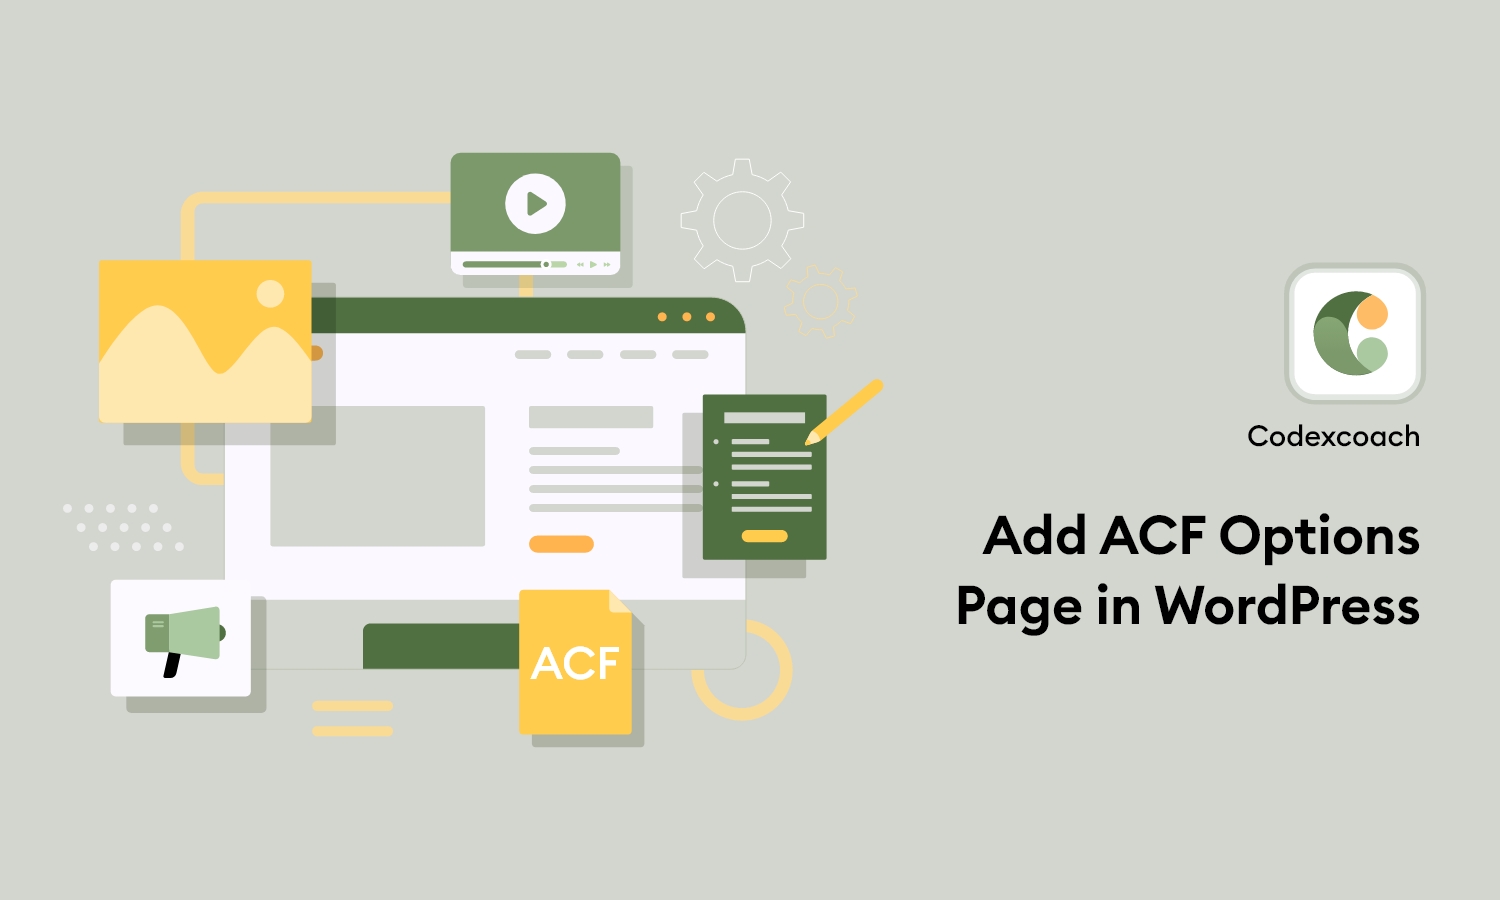 Add ACF Options Page in WordPress